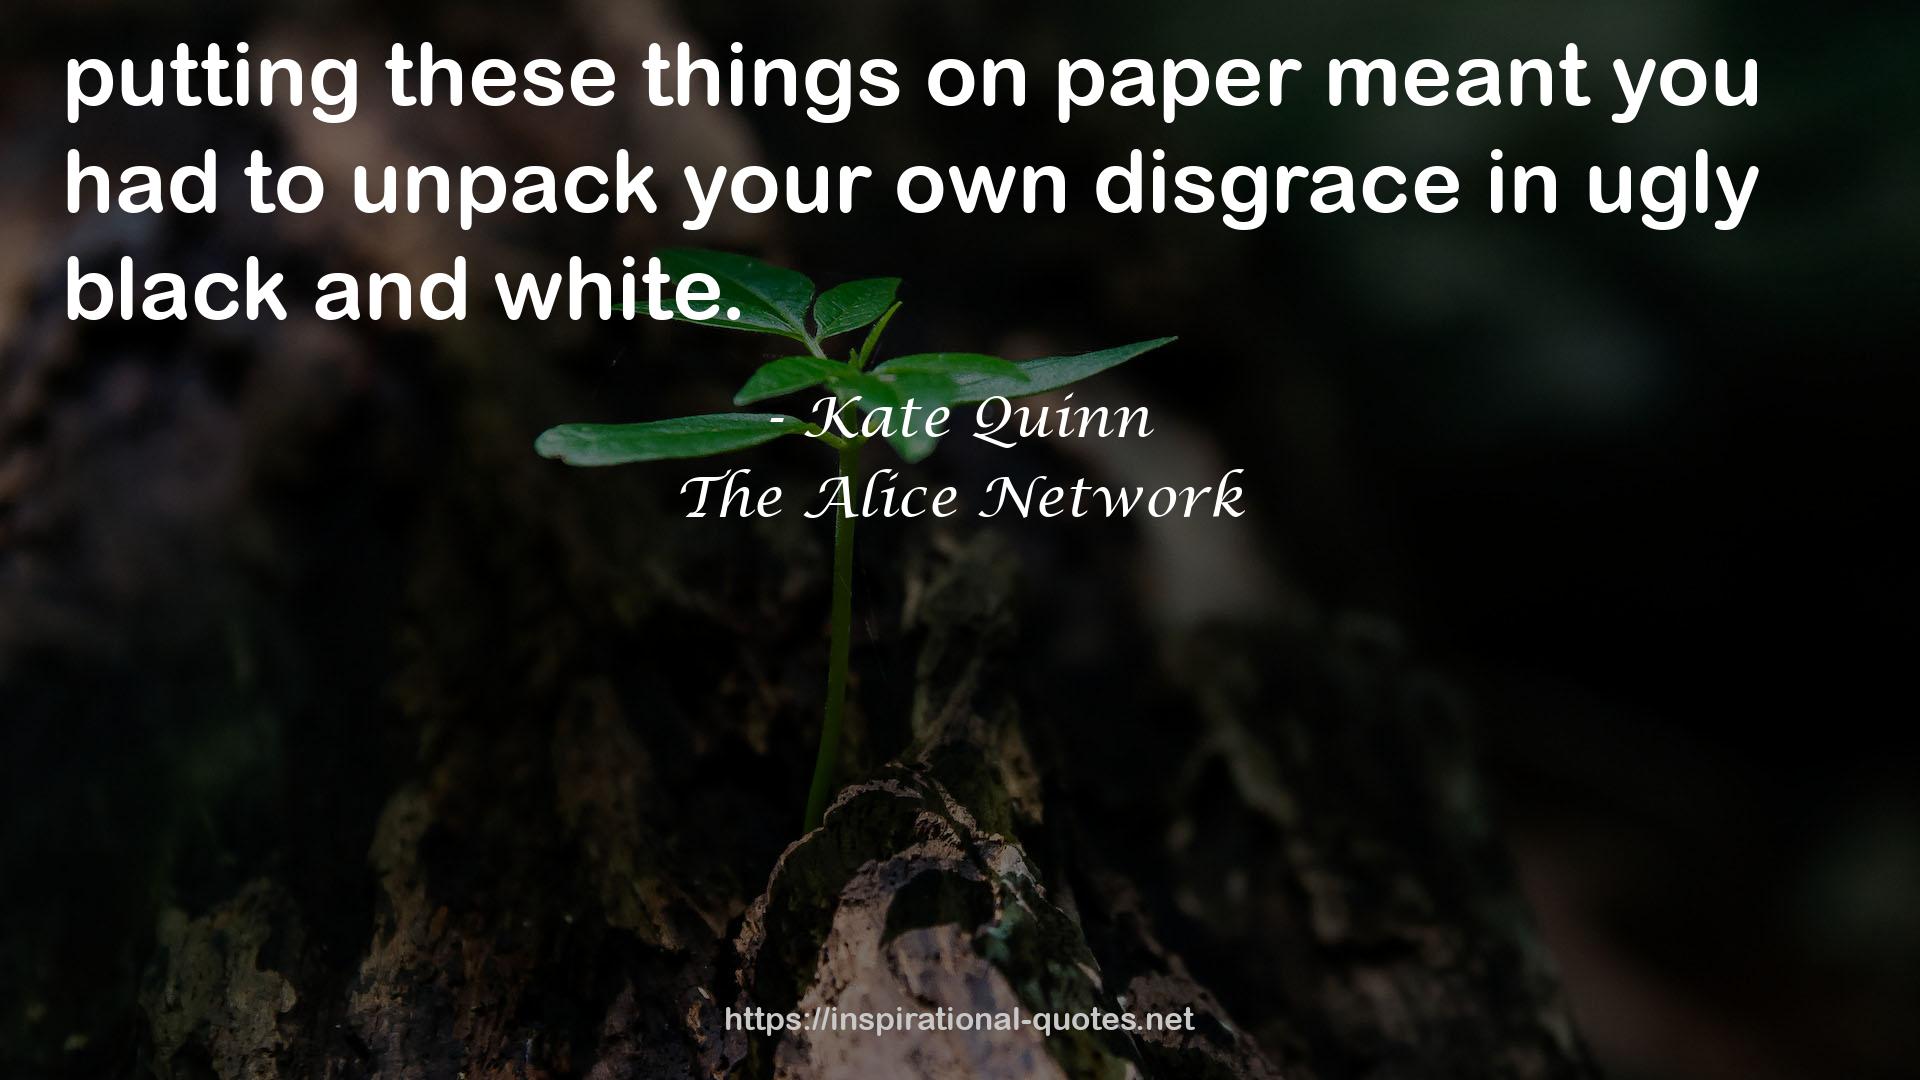 Kate Quinn QUOTES